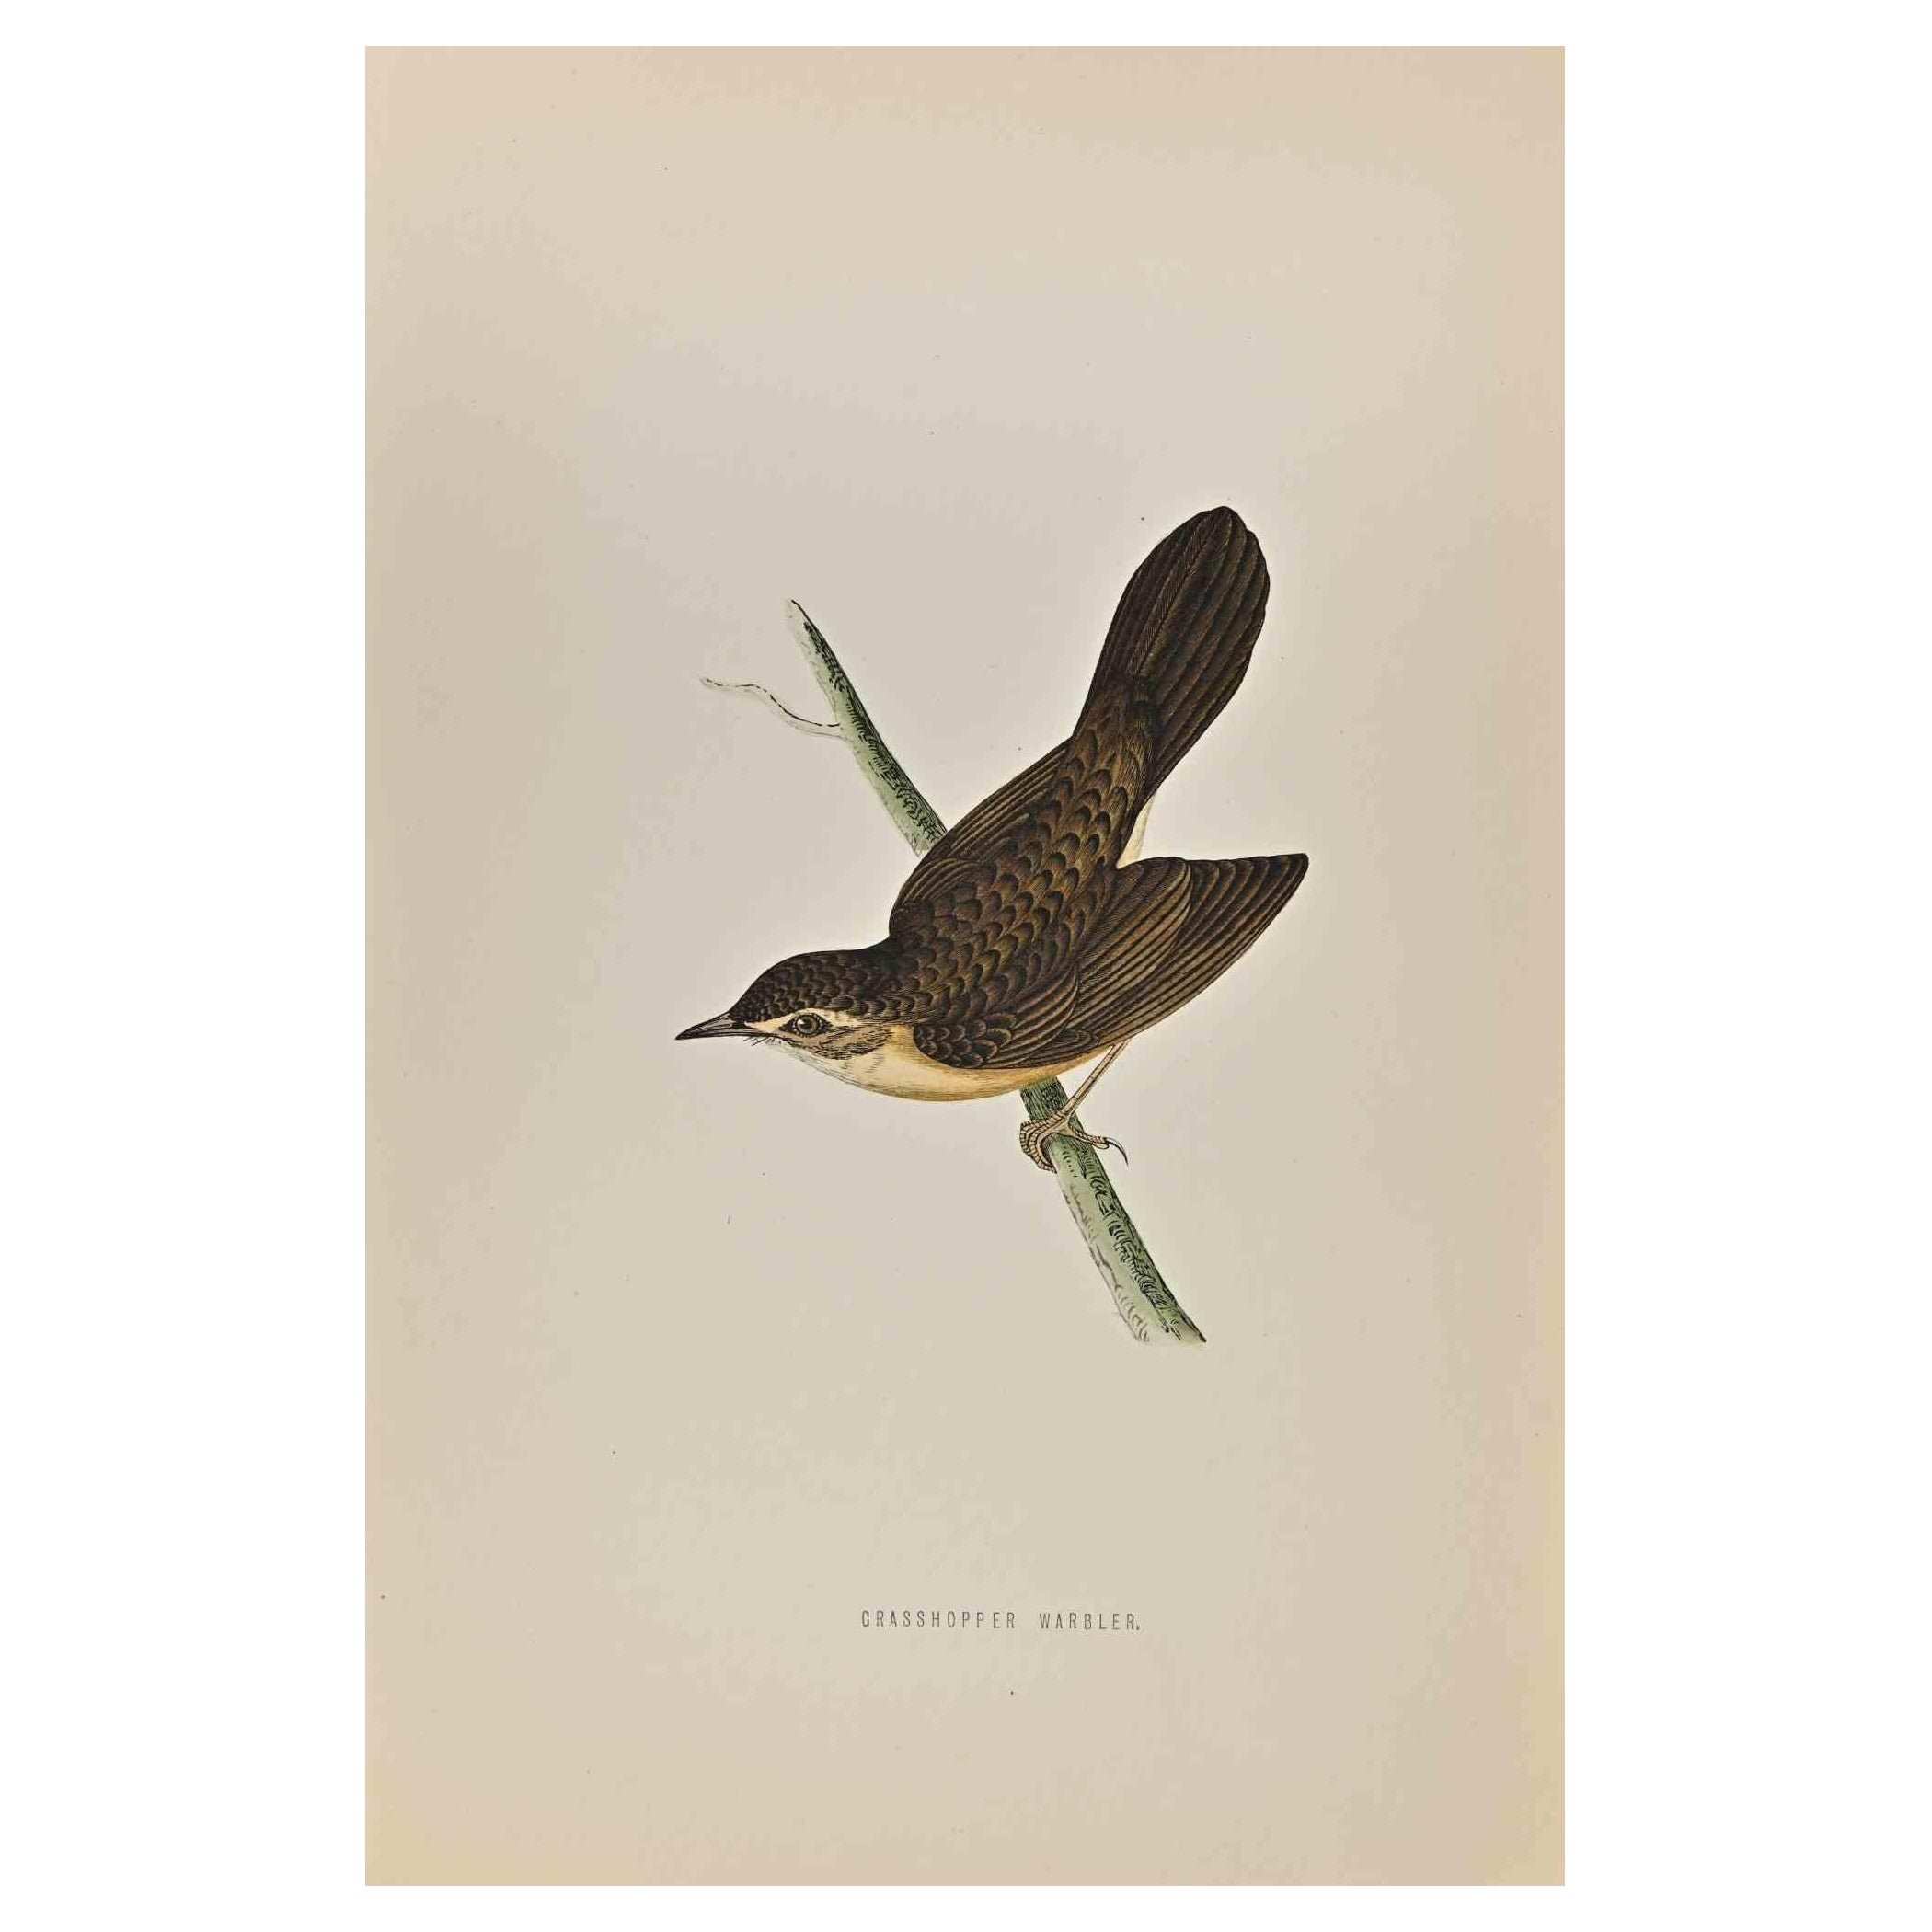 Grasshopper Warbler  is a modern artwork realized in 1870 by the British artist Alexander Francis Lydon (1836-1917) . 

Woodcut print, hand colored, published by London, Bell & Sons, 1870.  Name of the bird printed in plate. This work is part of a